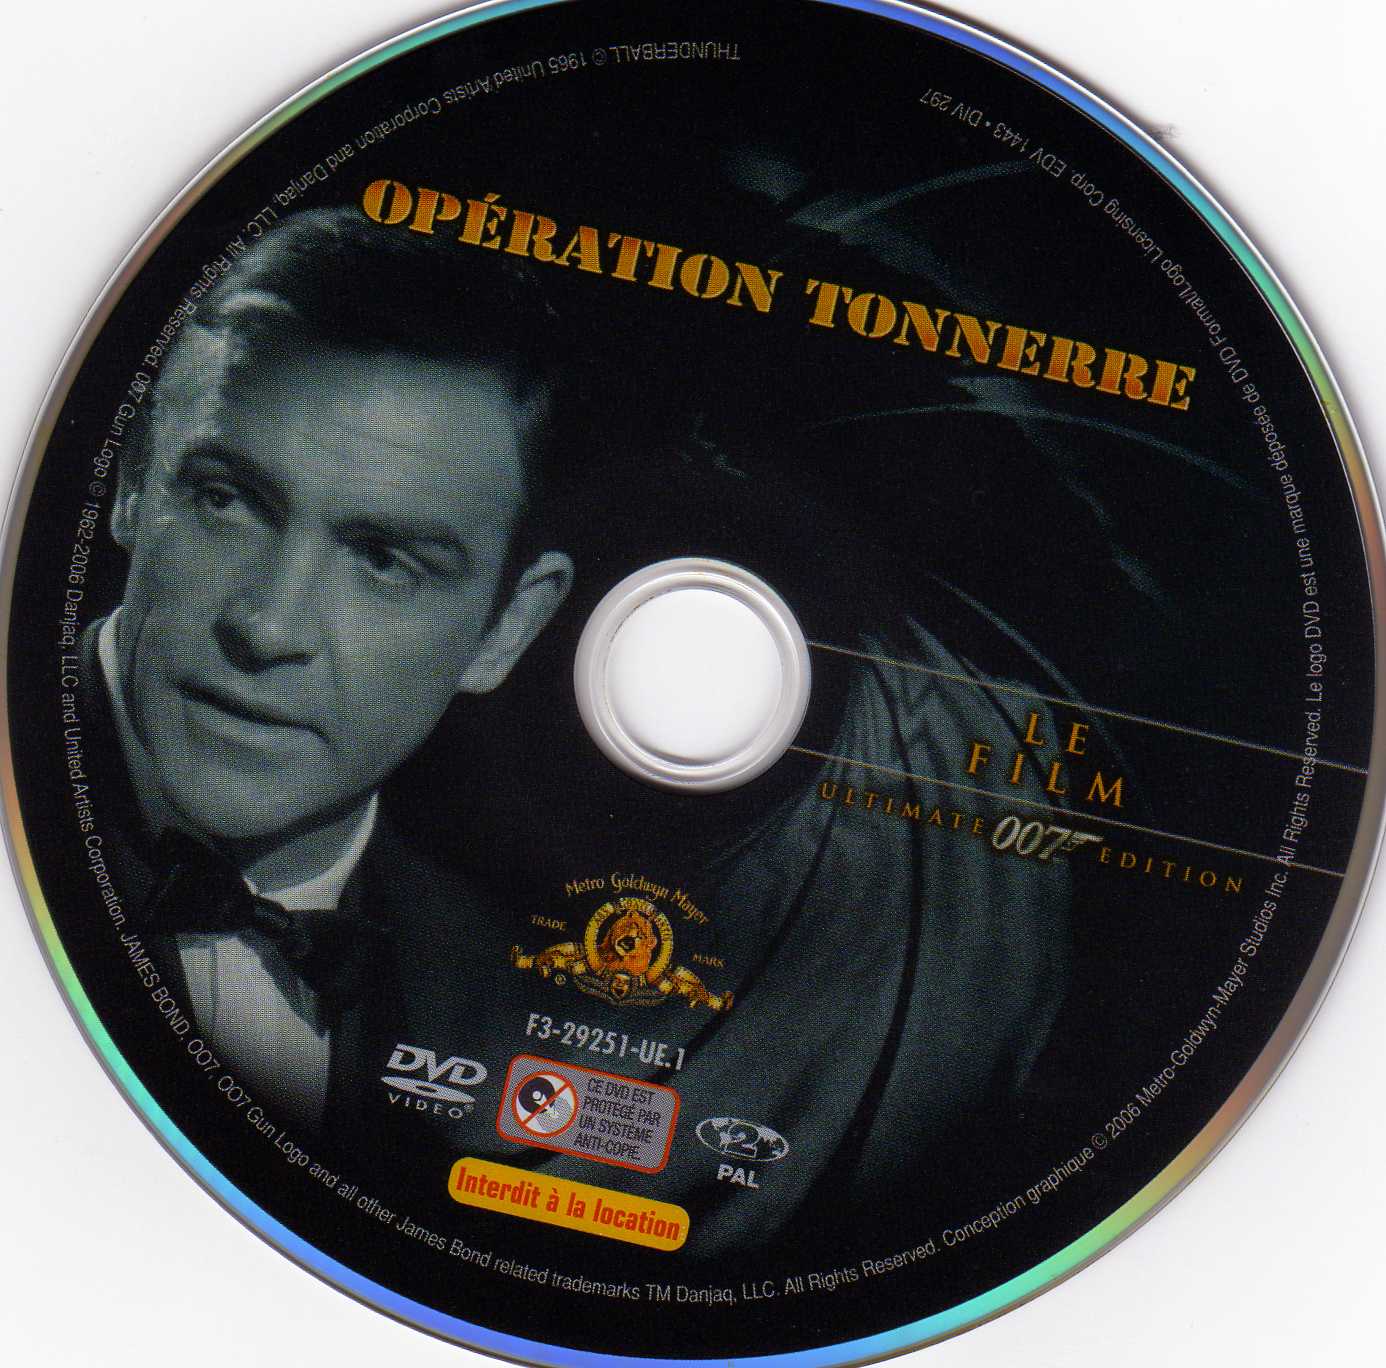 007 Opration tonnerre Ultimate Edition